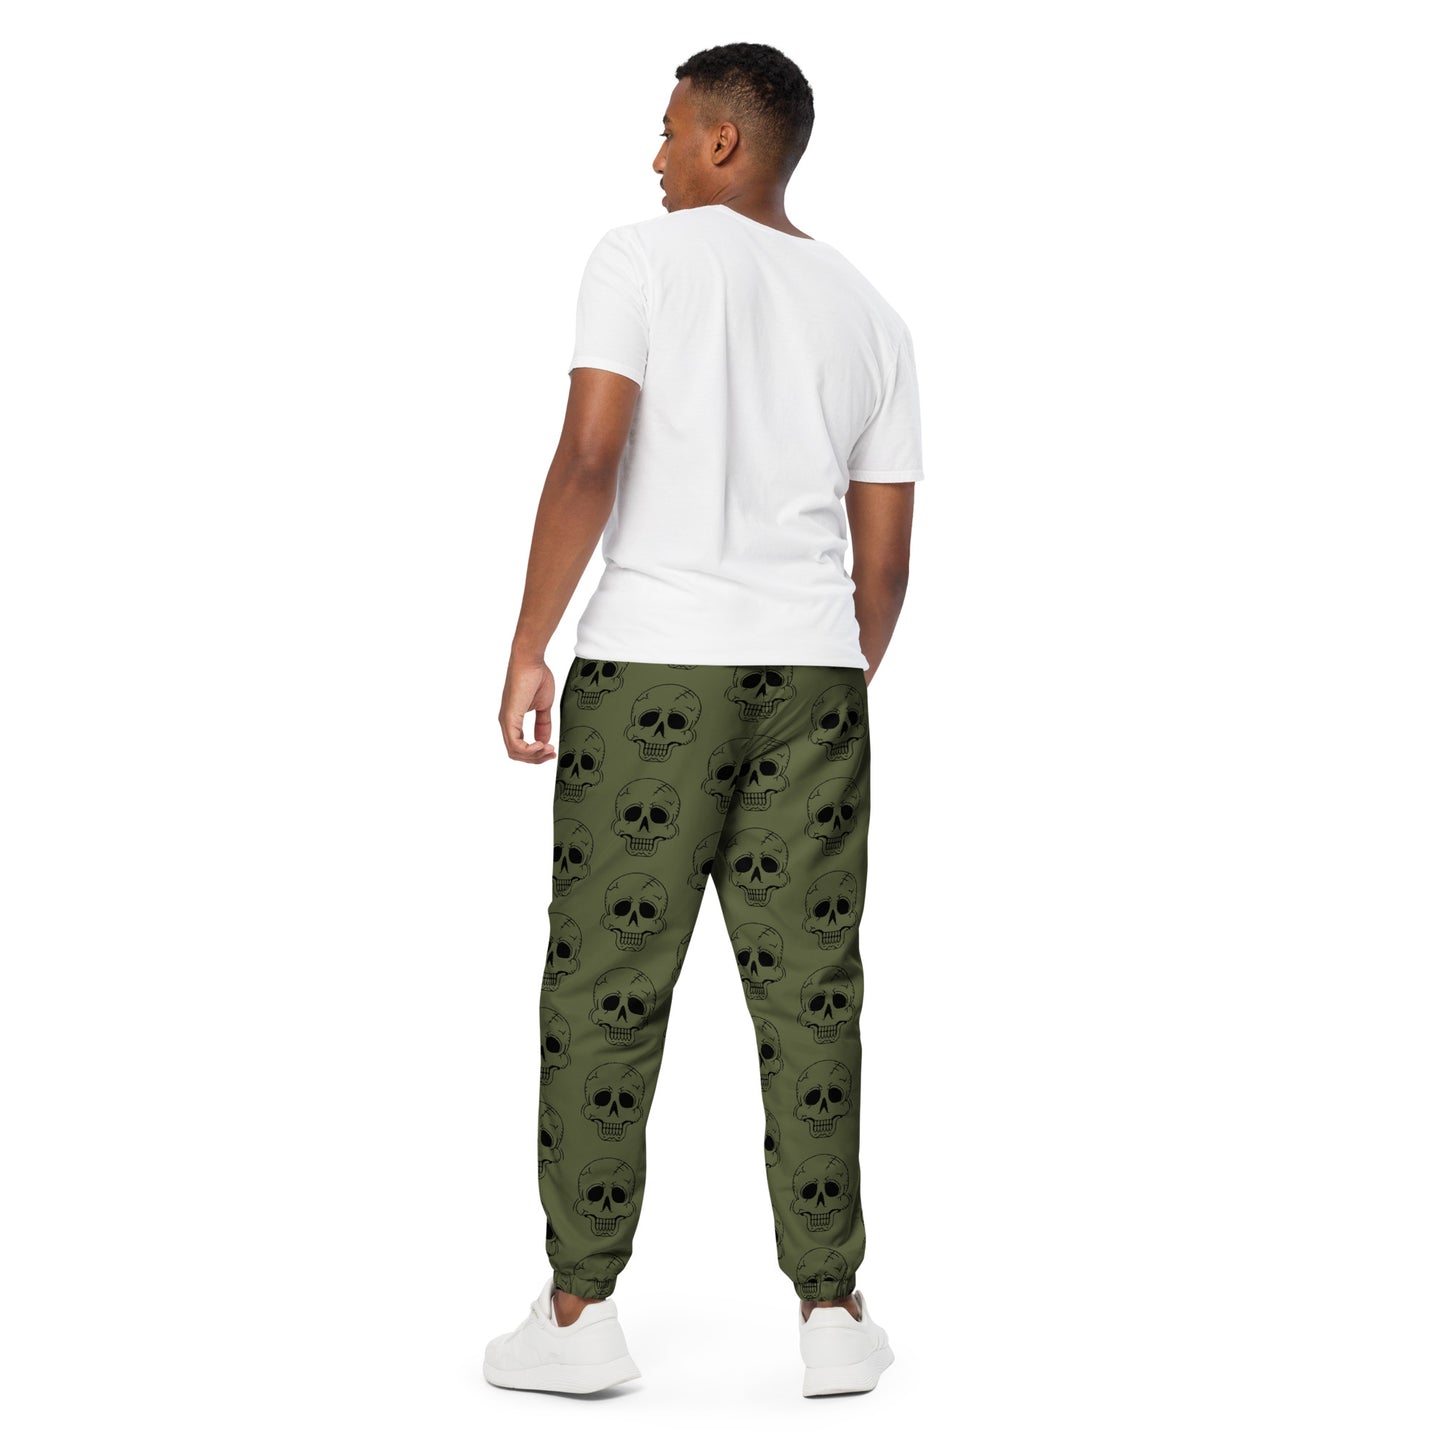 GREEN LAUGHING SKULL TRACK PANTS